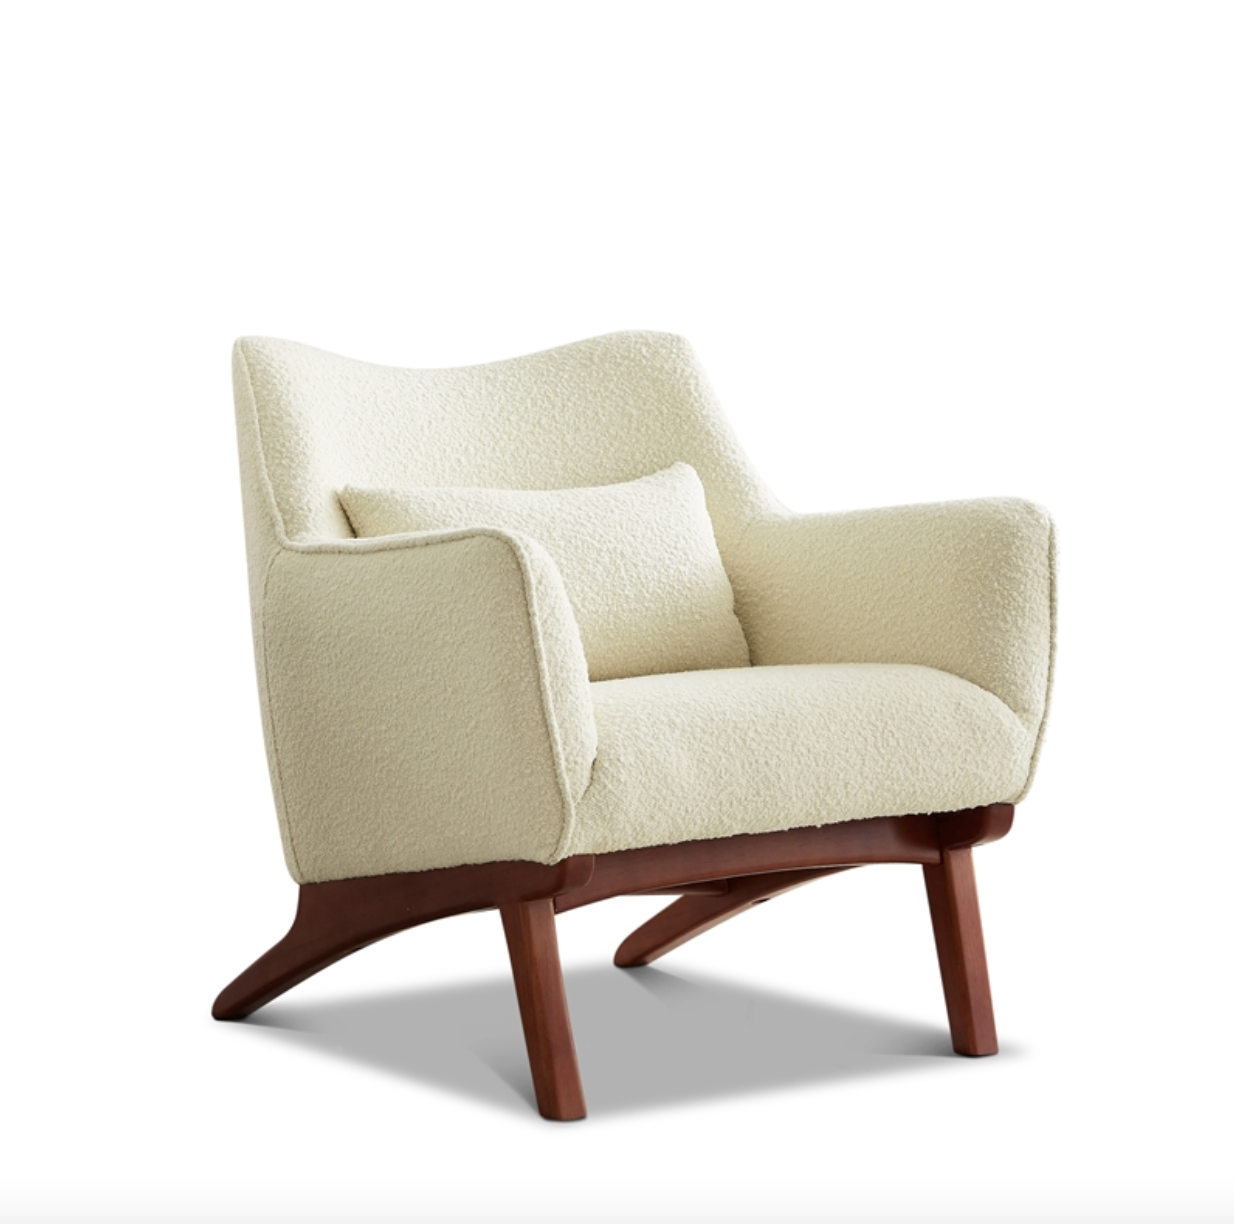 Gatsby Mid-Century Tight Back Fabric Upholstered Armchair in Beige